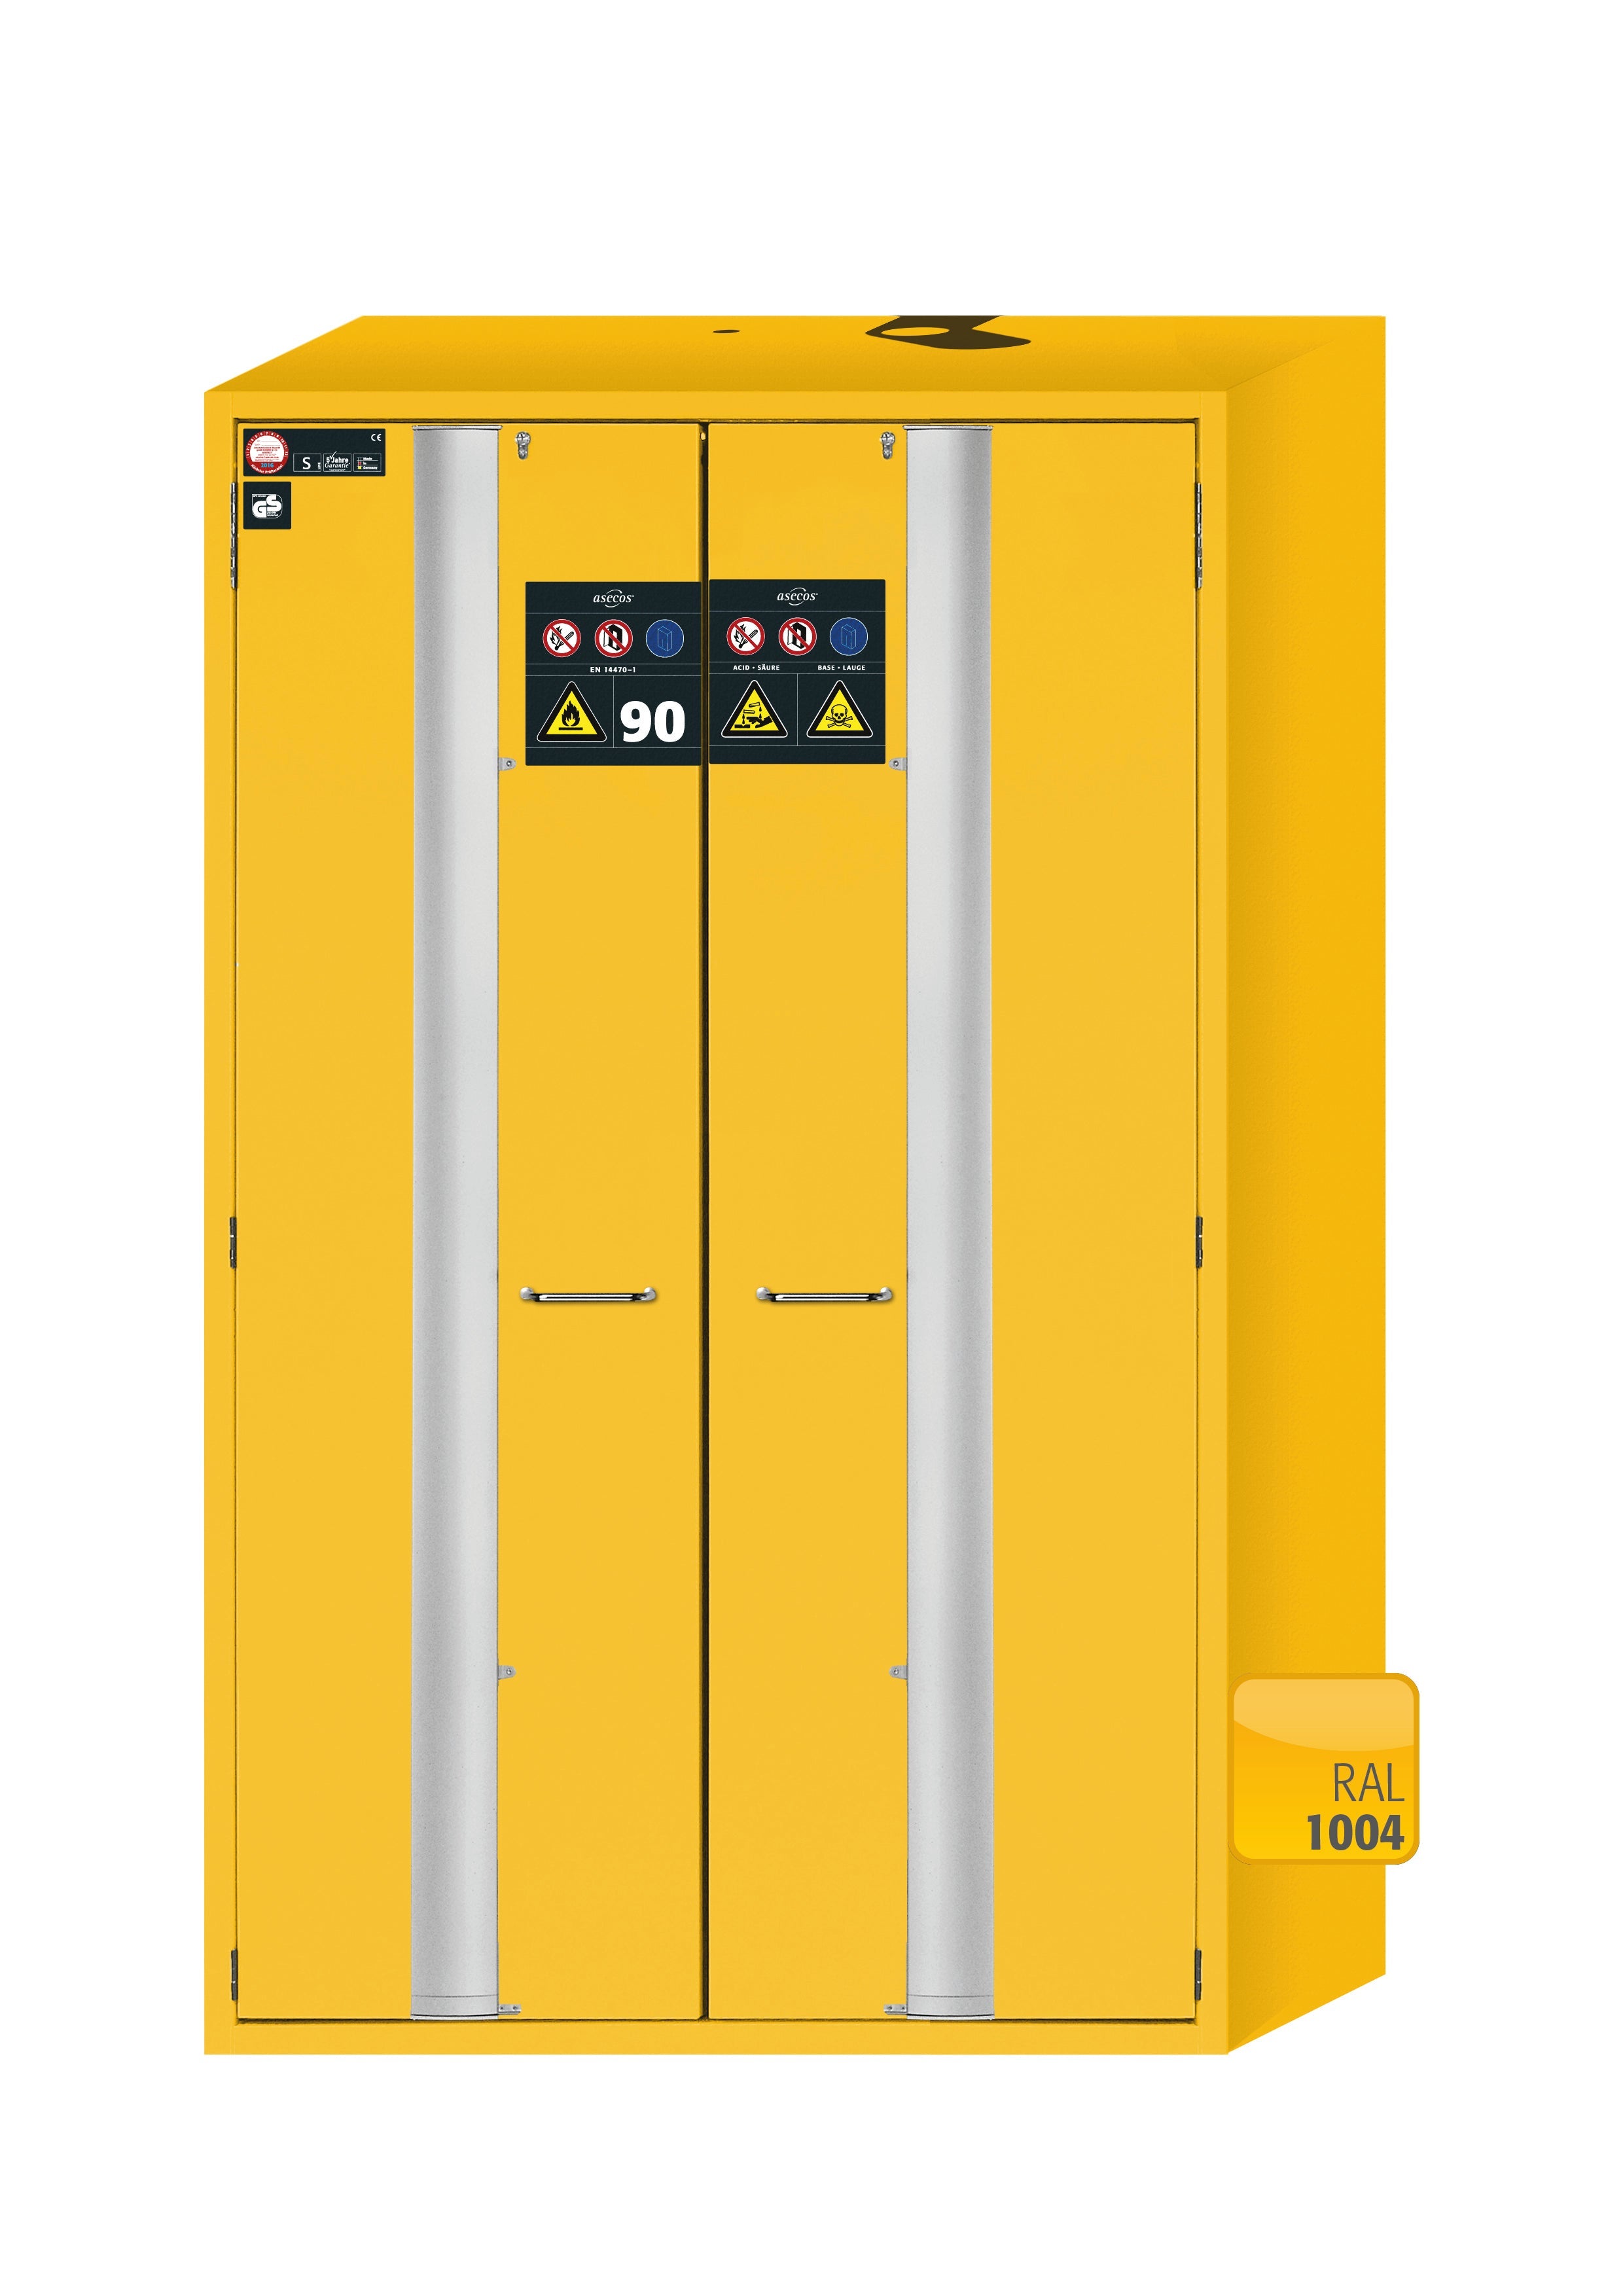 Type 90 safety cabinet S-PHOENIX-90 model S90.196.120.MV.FDAS in safety yellow RAL 1004 with 4x standard pull-out tray (sheet steel)